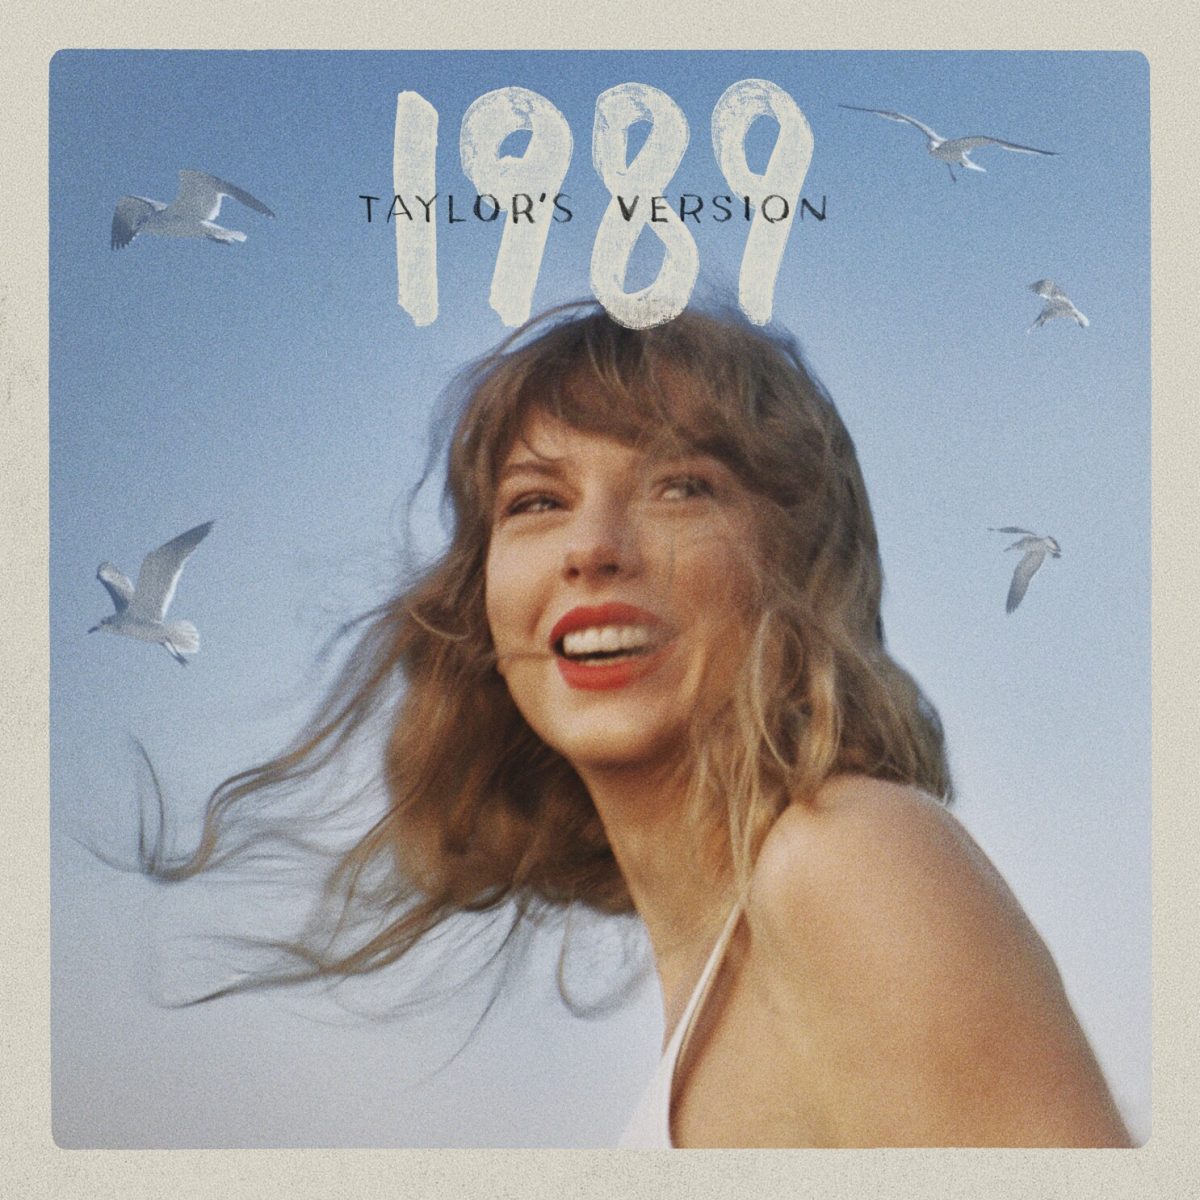 This cover image released by Republic Records shows 1989 (Taylor’s Version) by Taylor Swift. (Republic Records via AP)